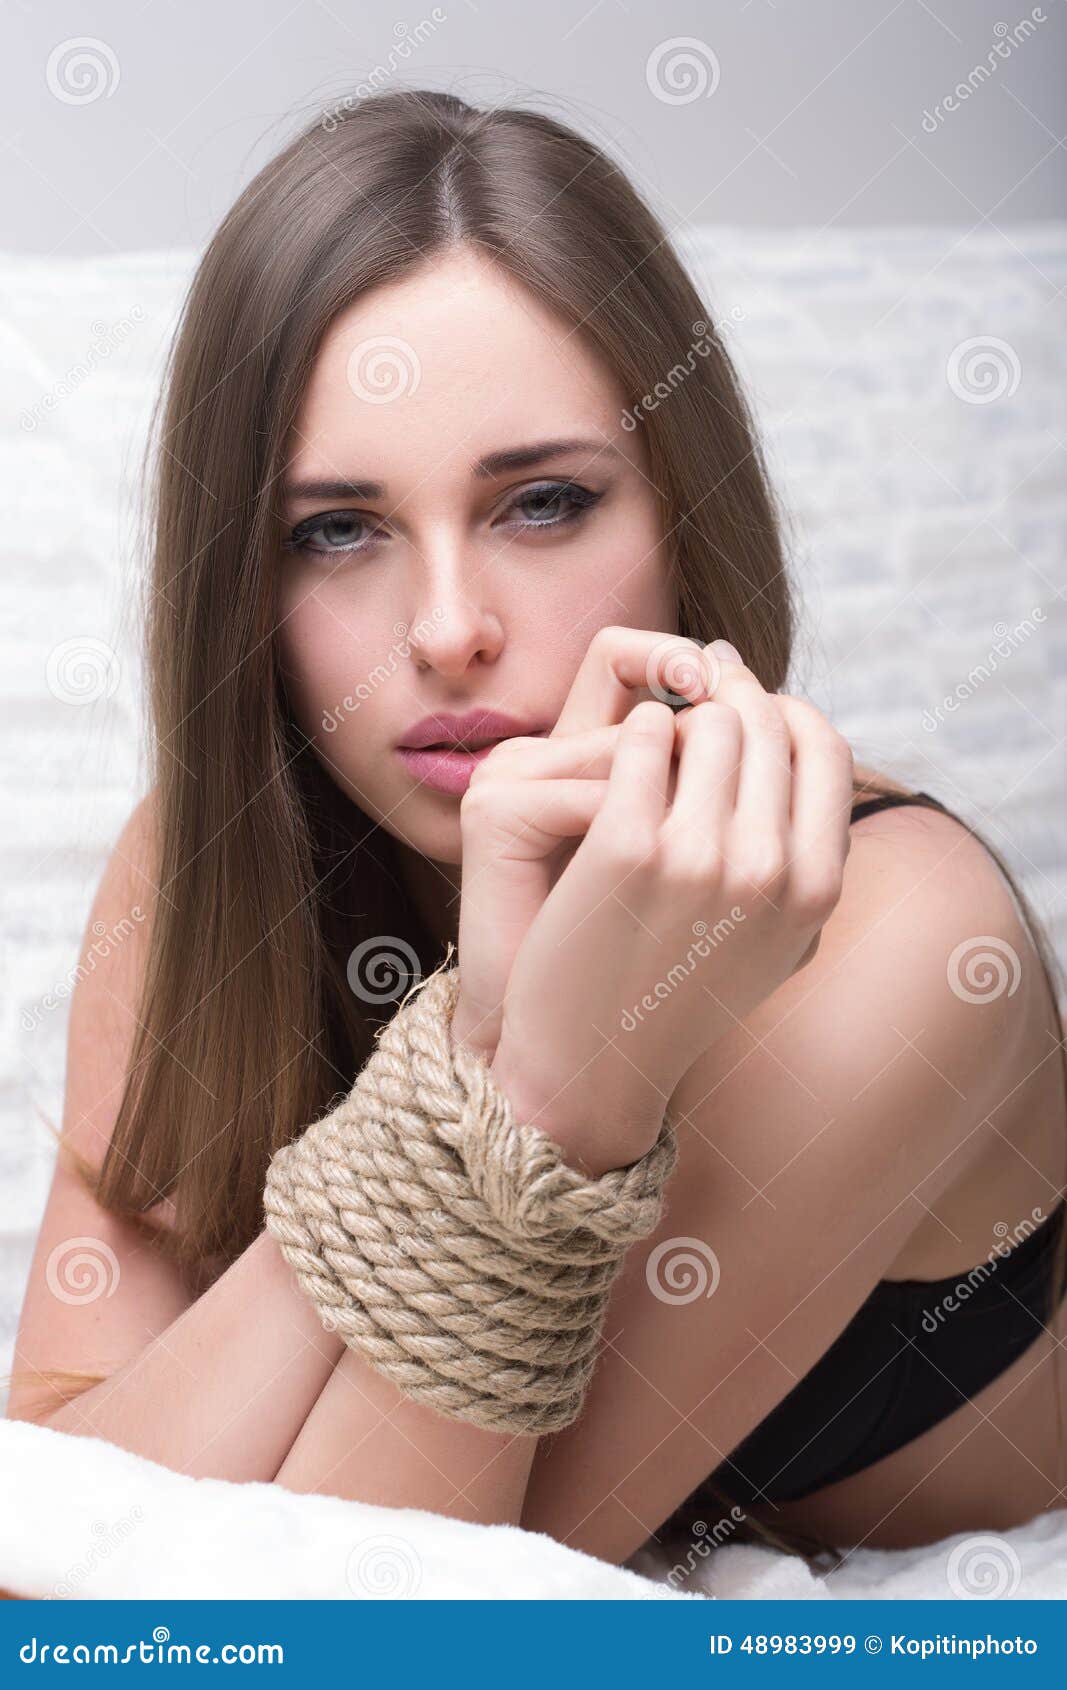 Model Tied Up With Fetish Restraint Rope Stock Image Image Of Madam 